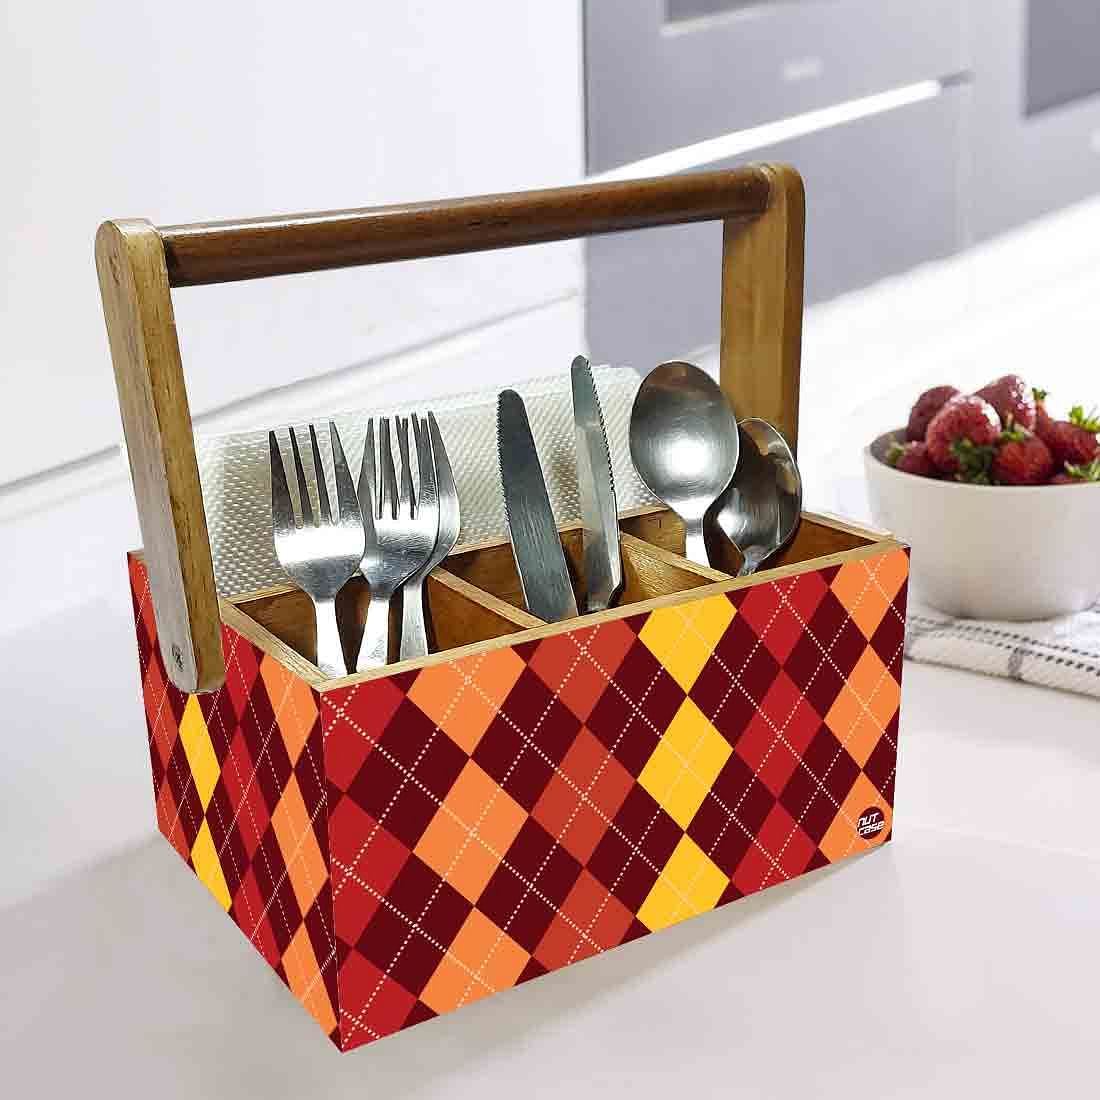 Cutlery Stand for Dining Table Spoons Forks Tissue Organizer - Hexa Pattern Nutcase